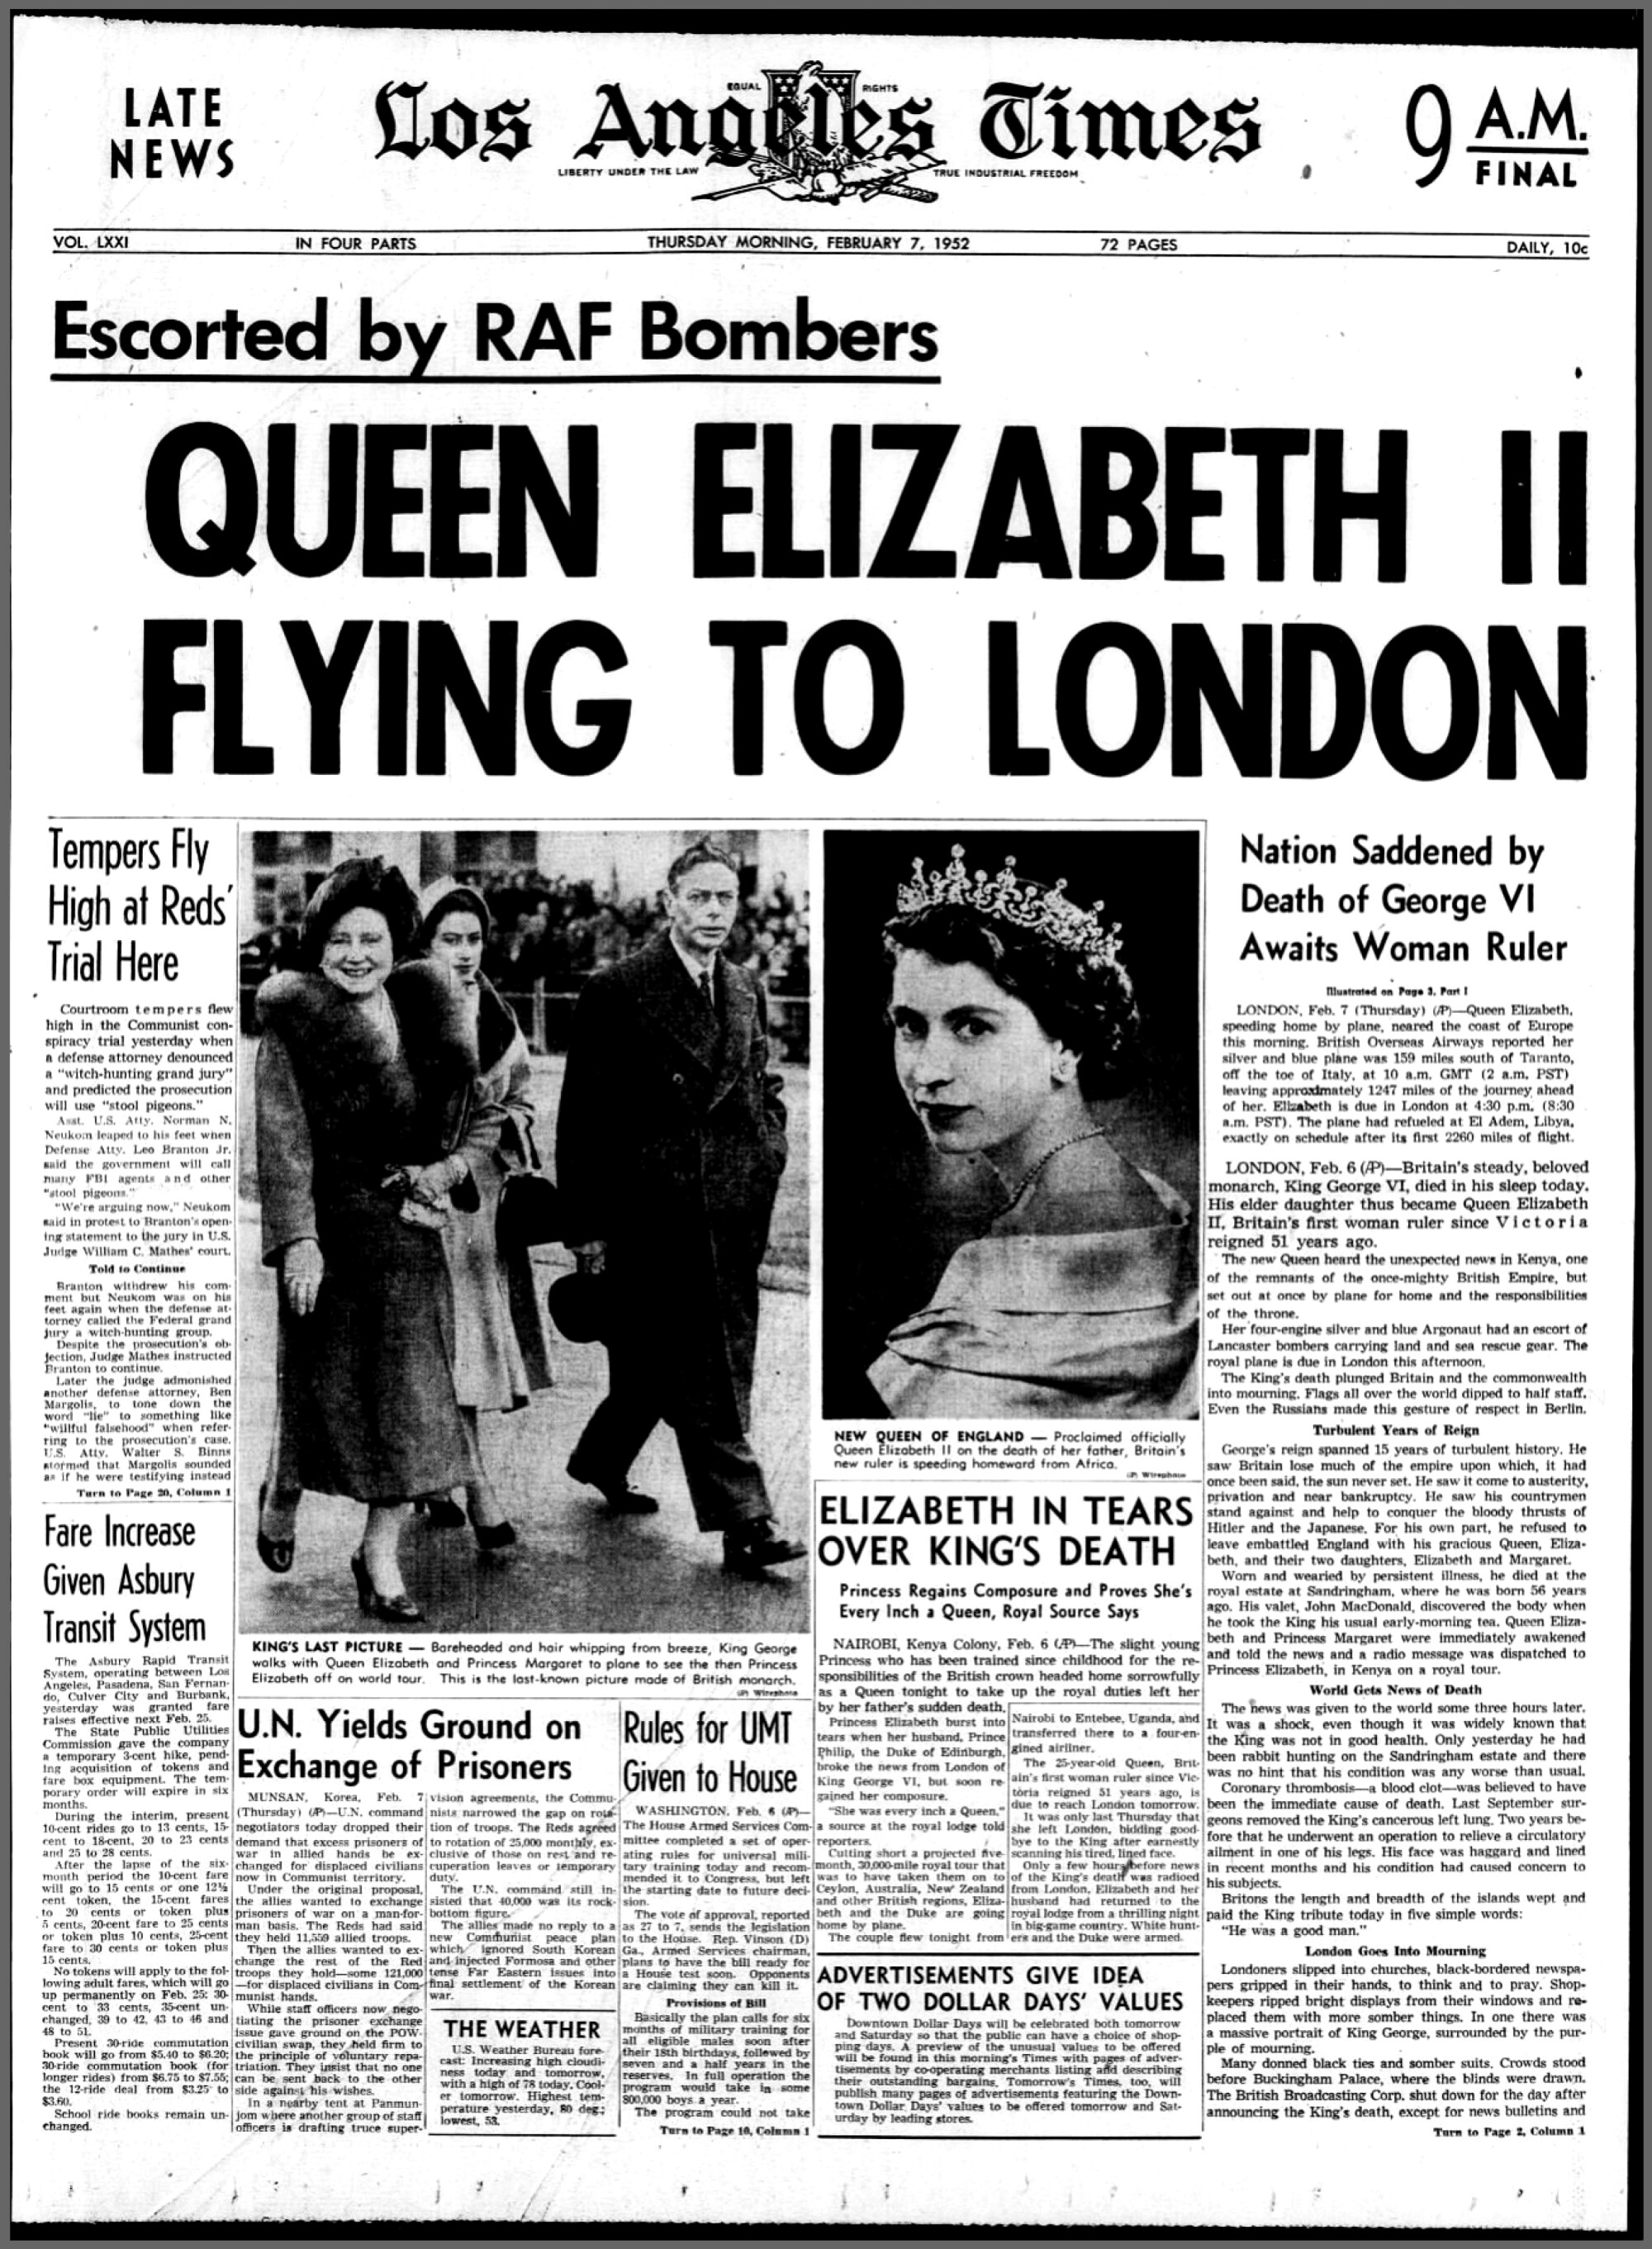 The headline on the front page of the Los Angeles Times reads, Queen Elizabeth II Flying to London 